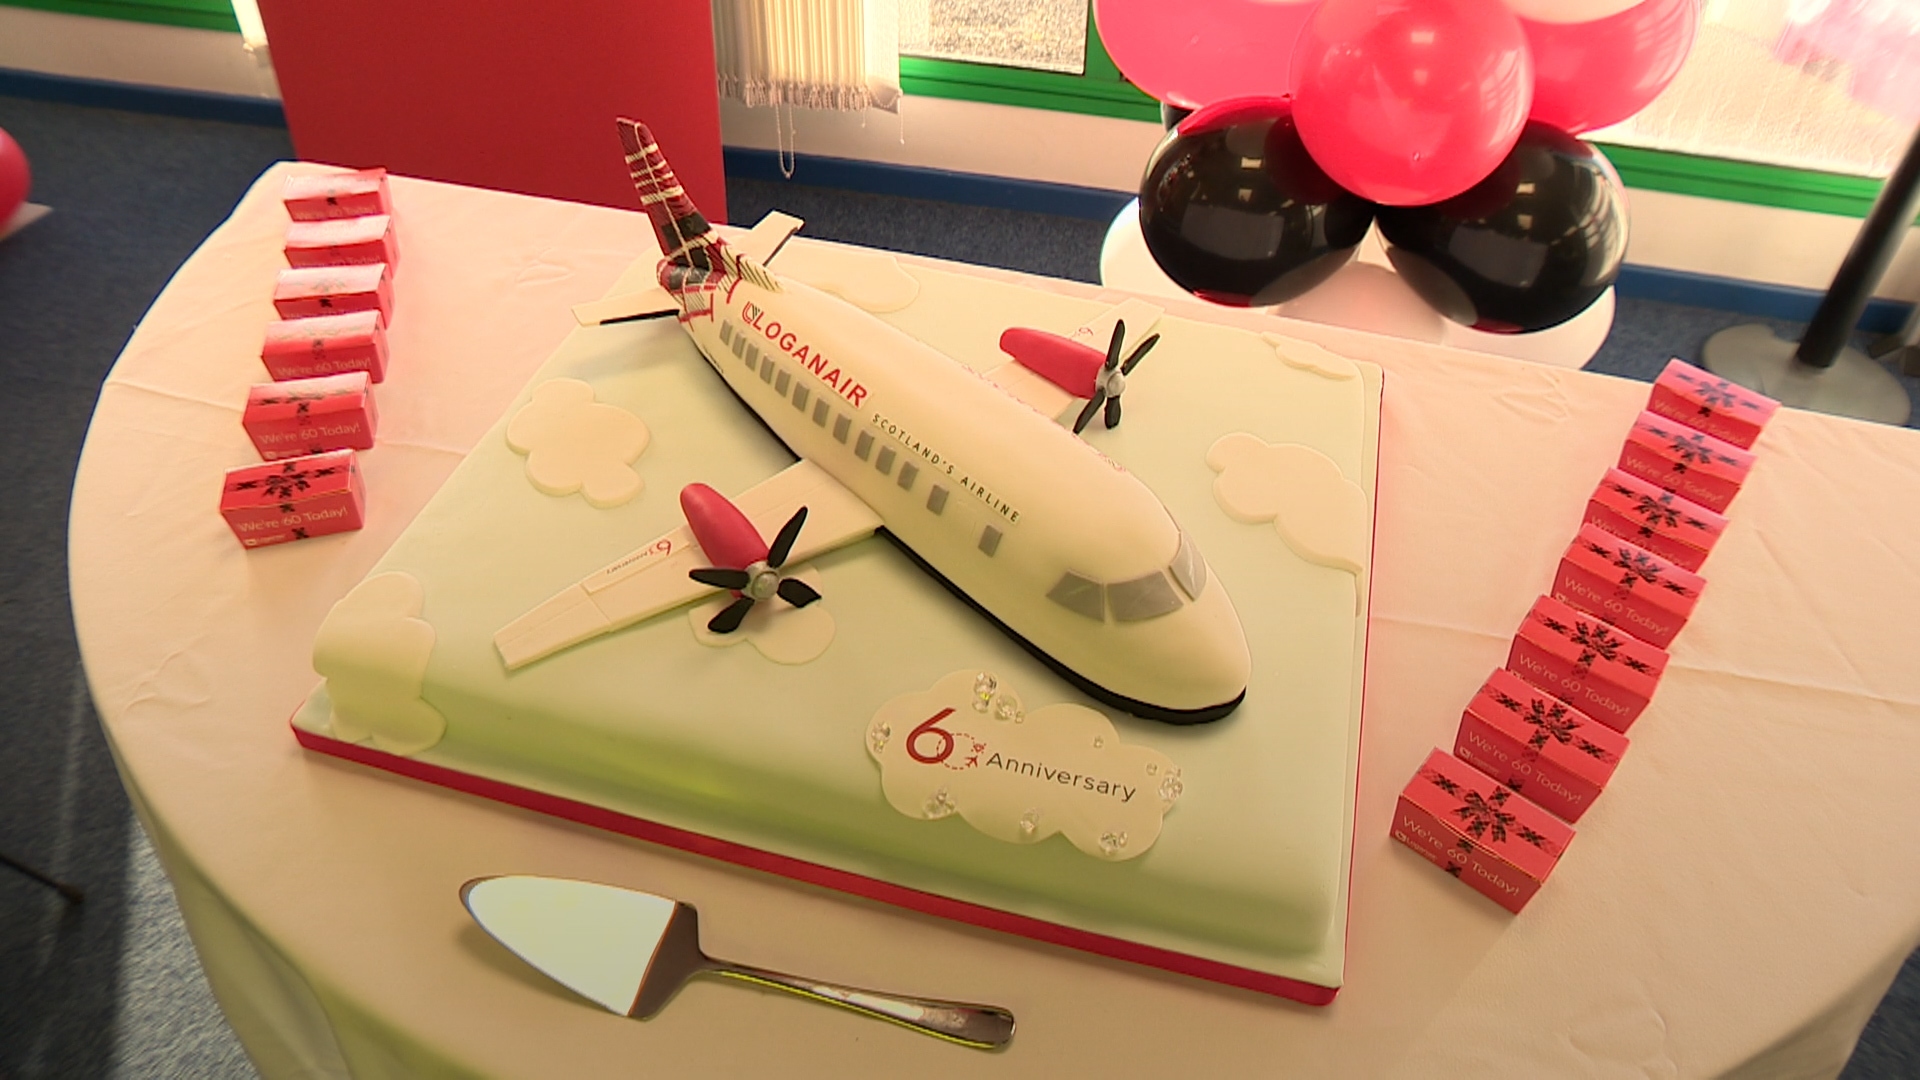 Loganair celebrated its 60th birthday with a celebration at Dundee airport.